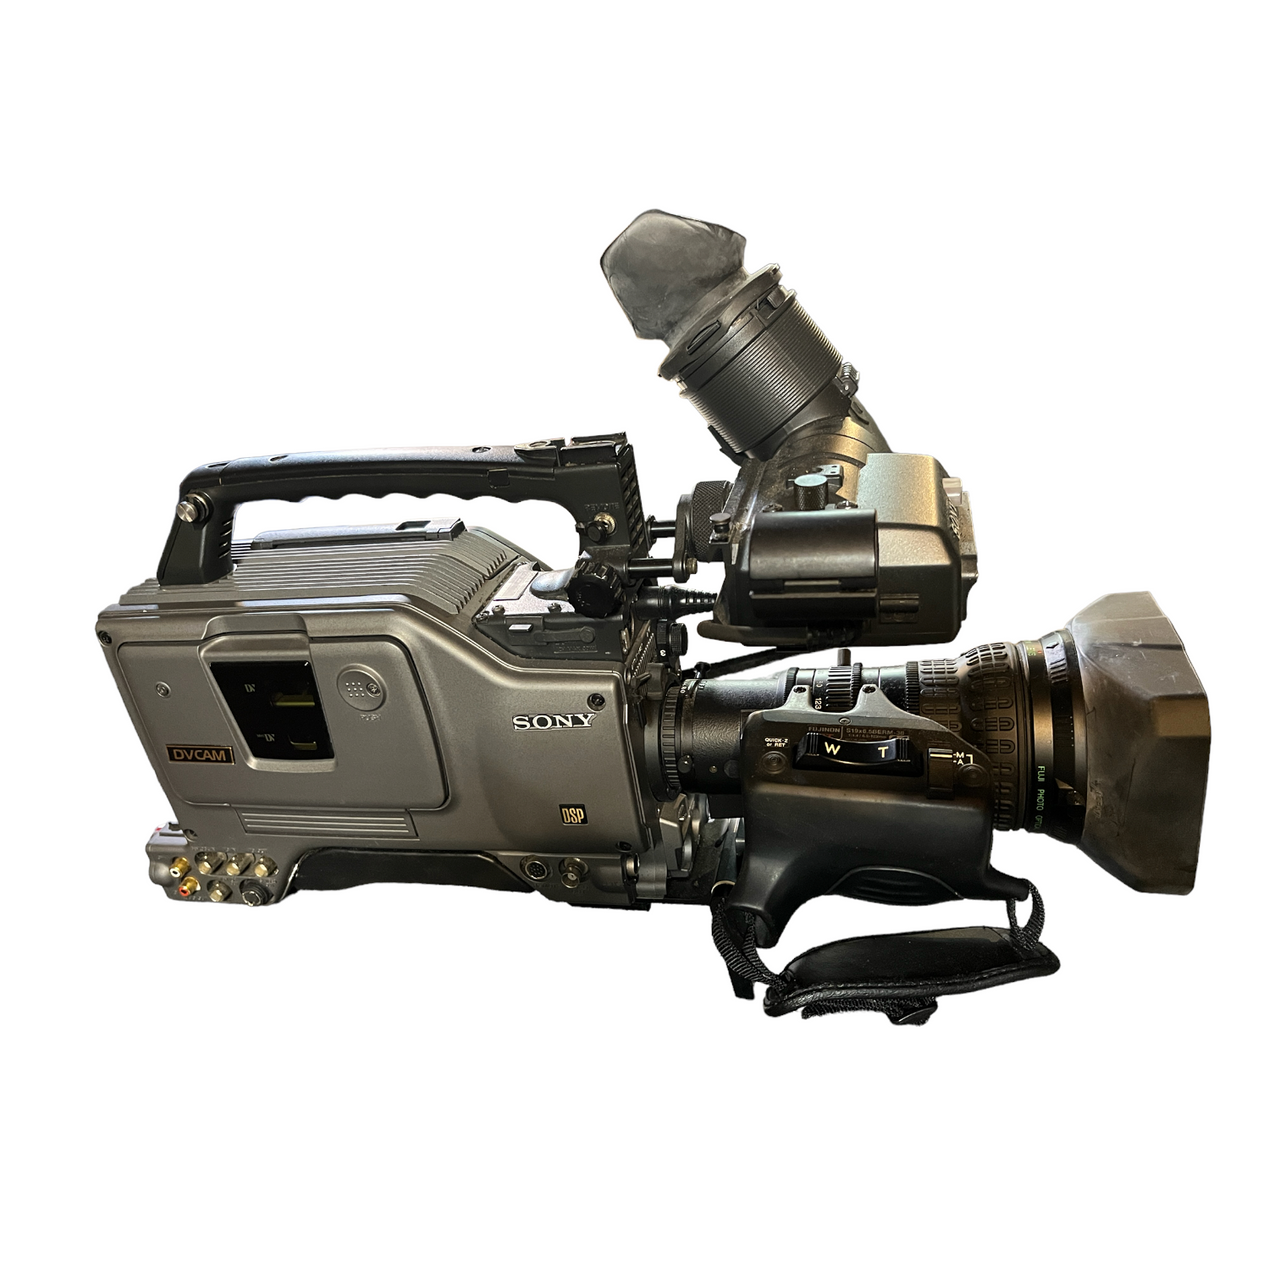 Sony DSR 300 with Fujinon S19x6.5 Lens